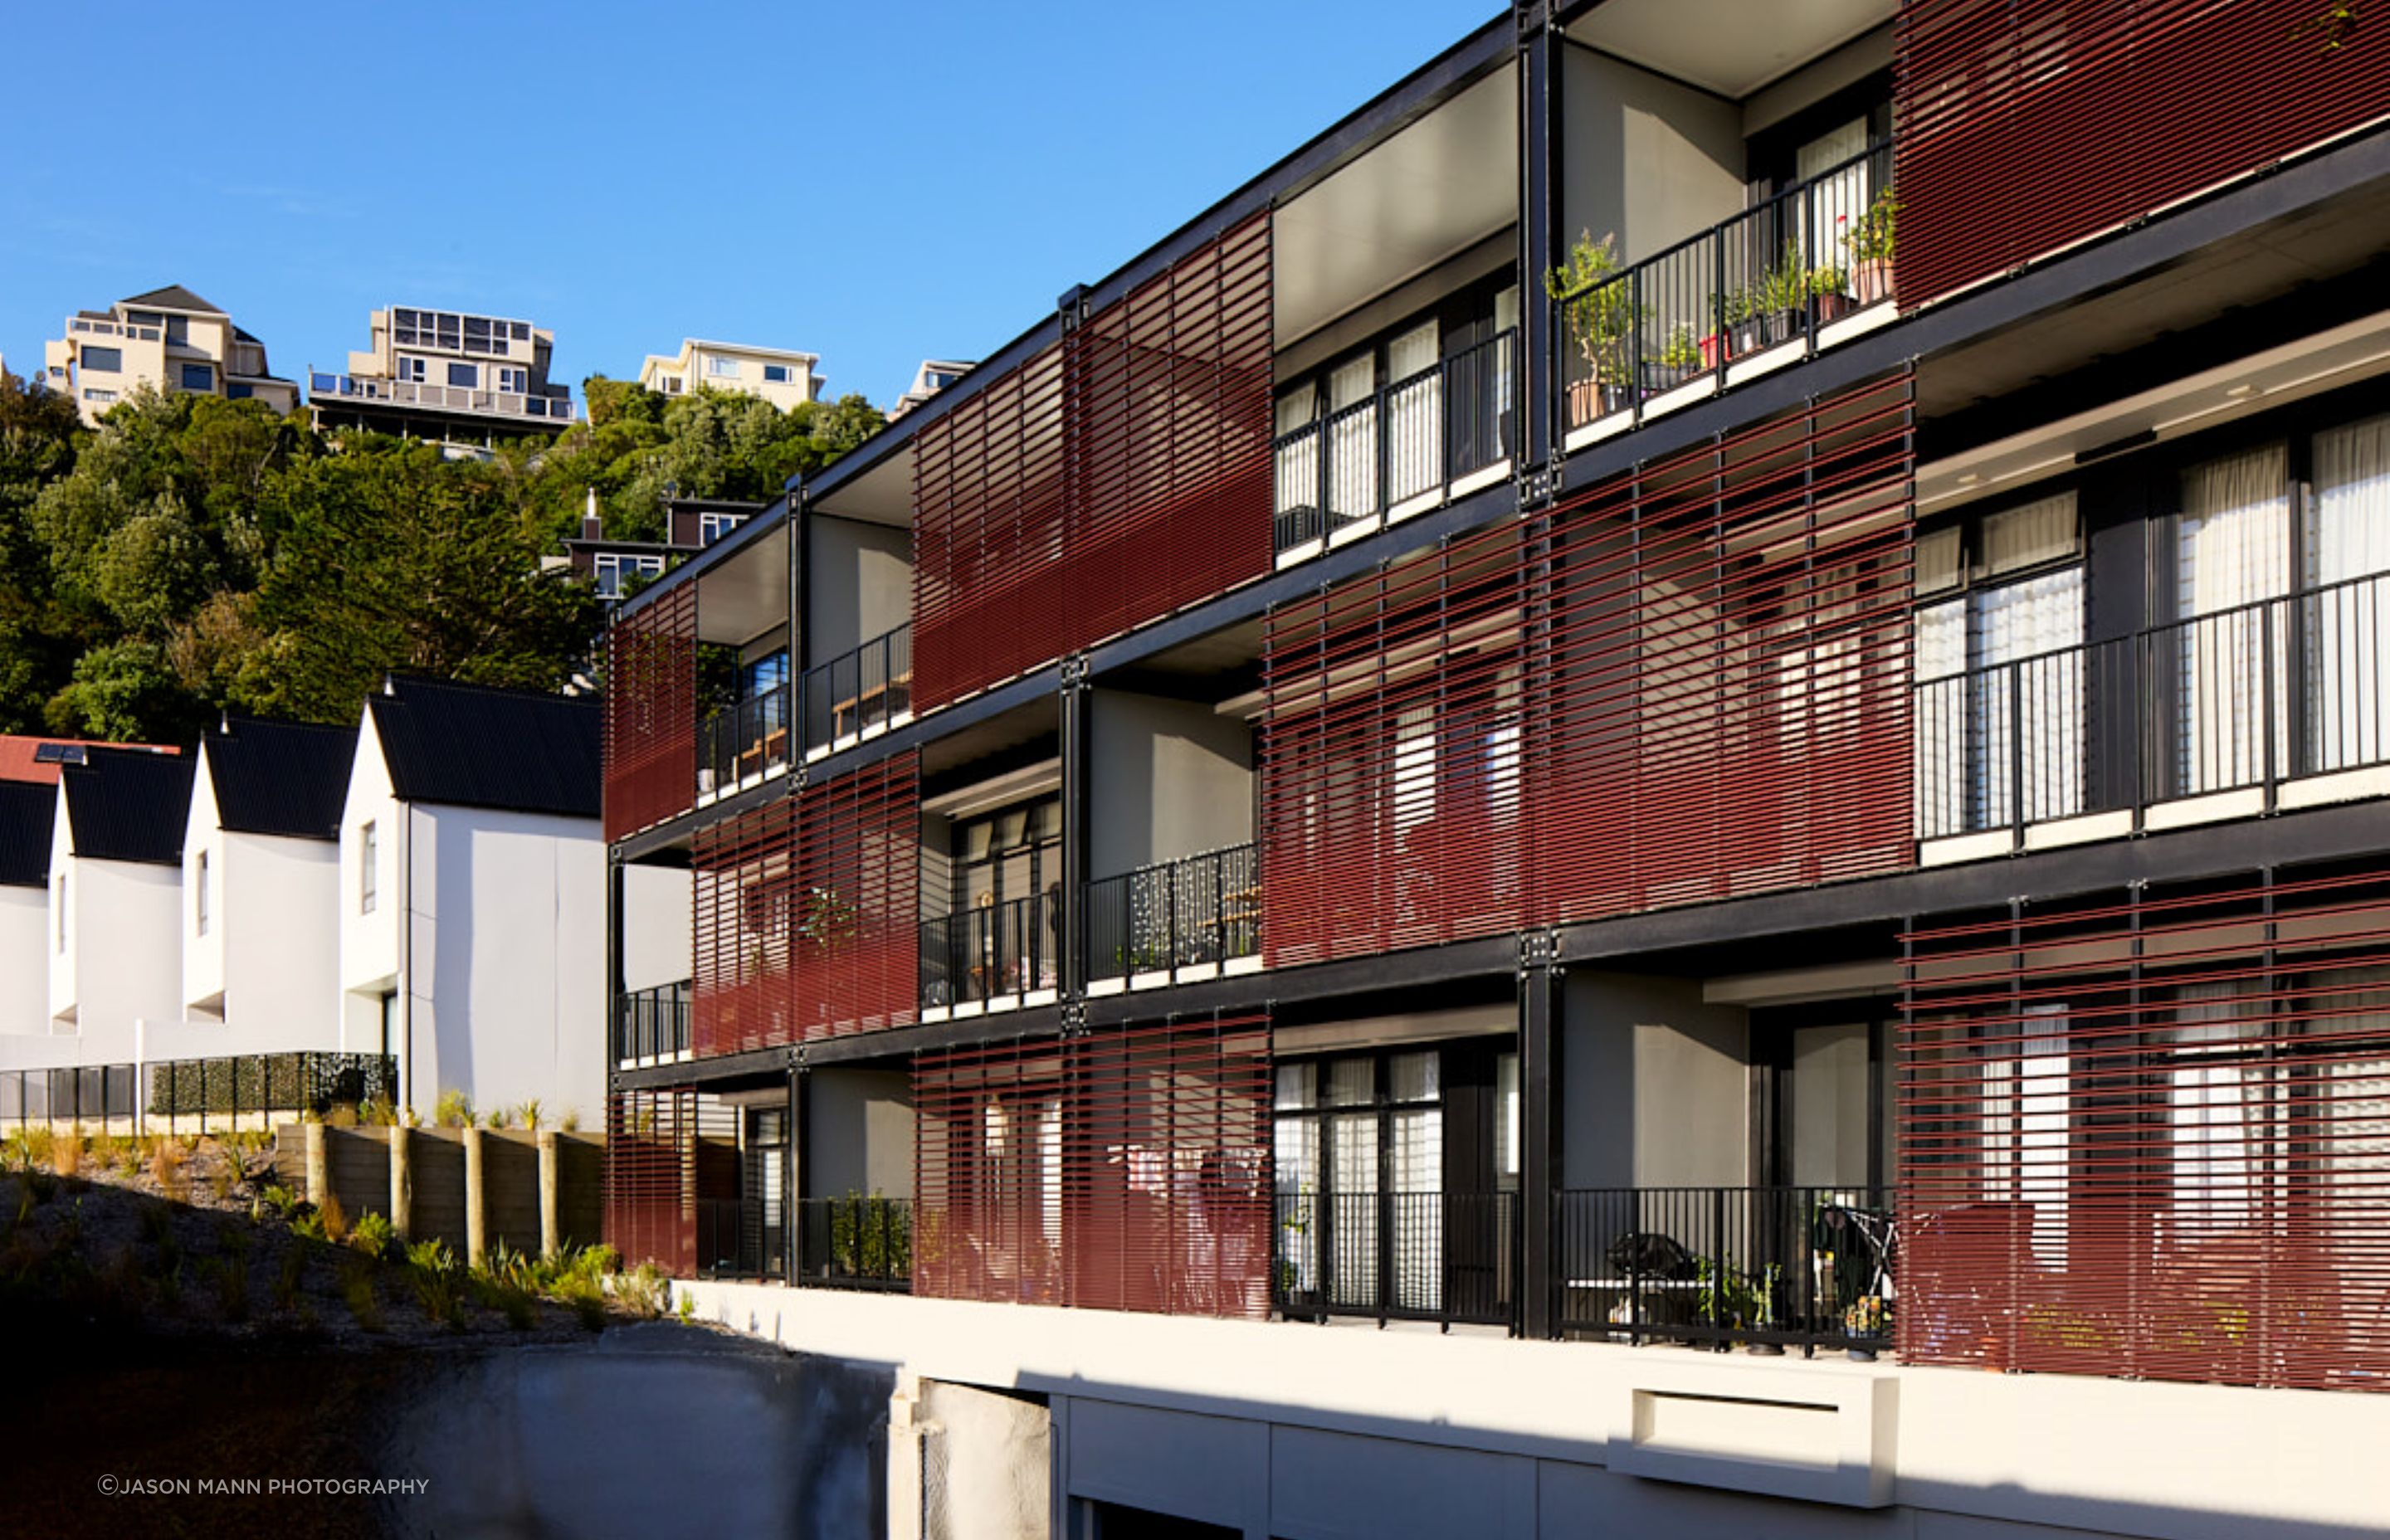 The development features 15 building typologies to attract a wide range of homeowners.